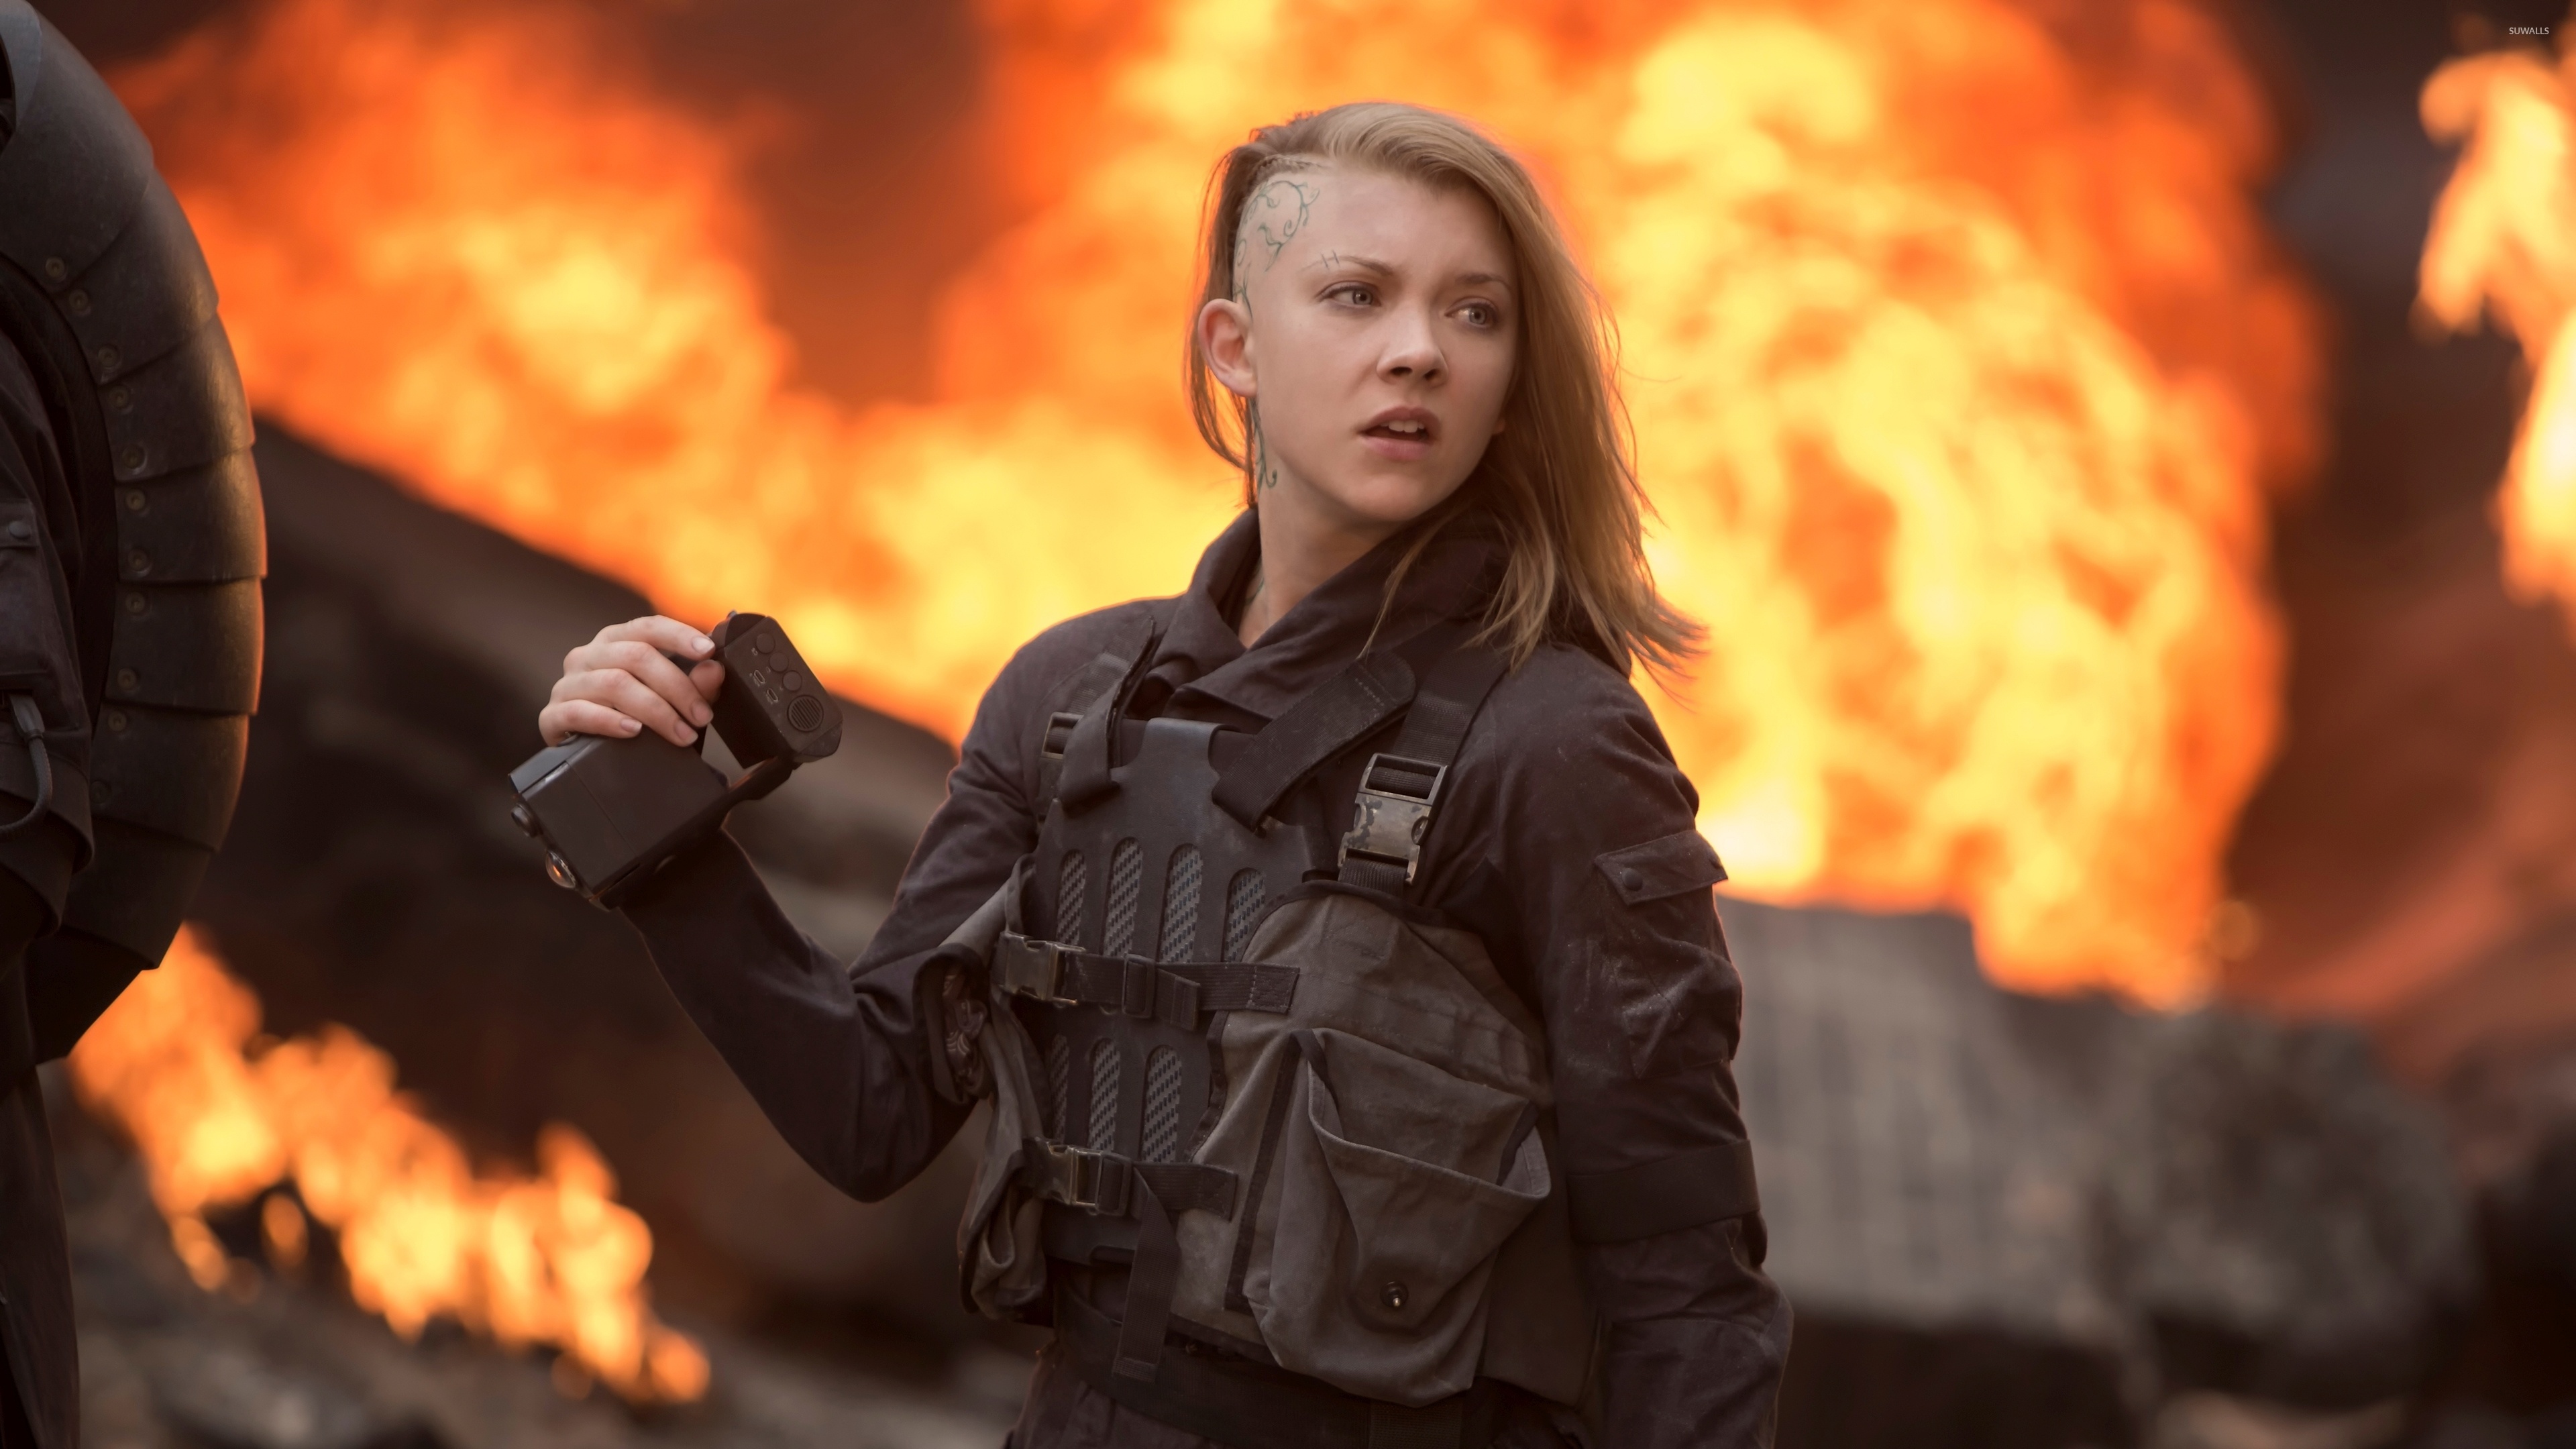 Hunger Games: Cressida, the resident director from the Capitol, Mockingjay. 3840x2160 4K Wallpaper.